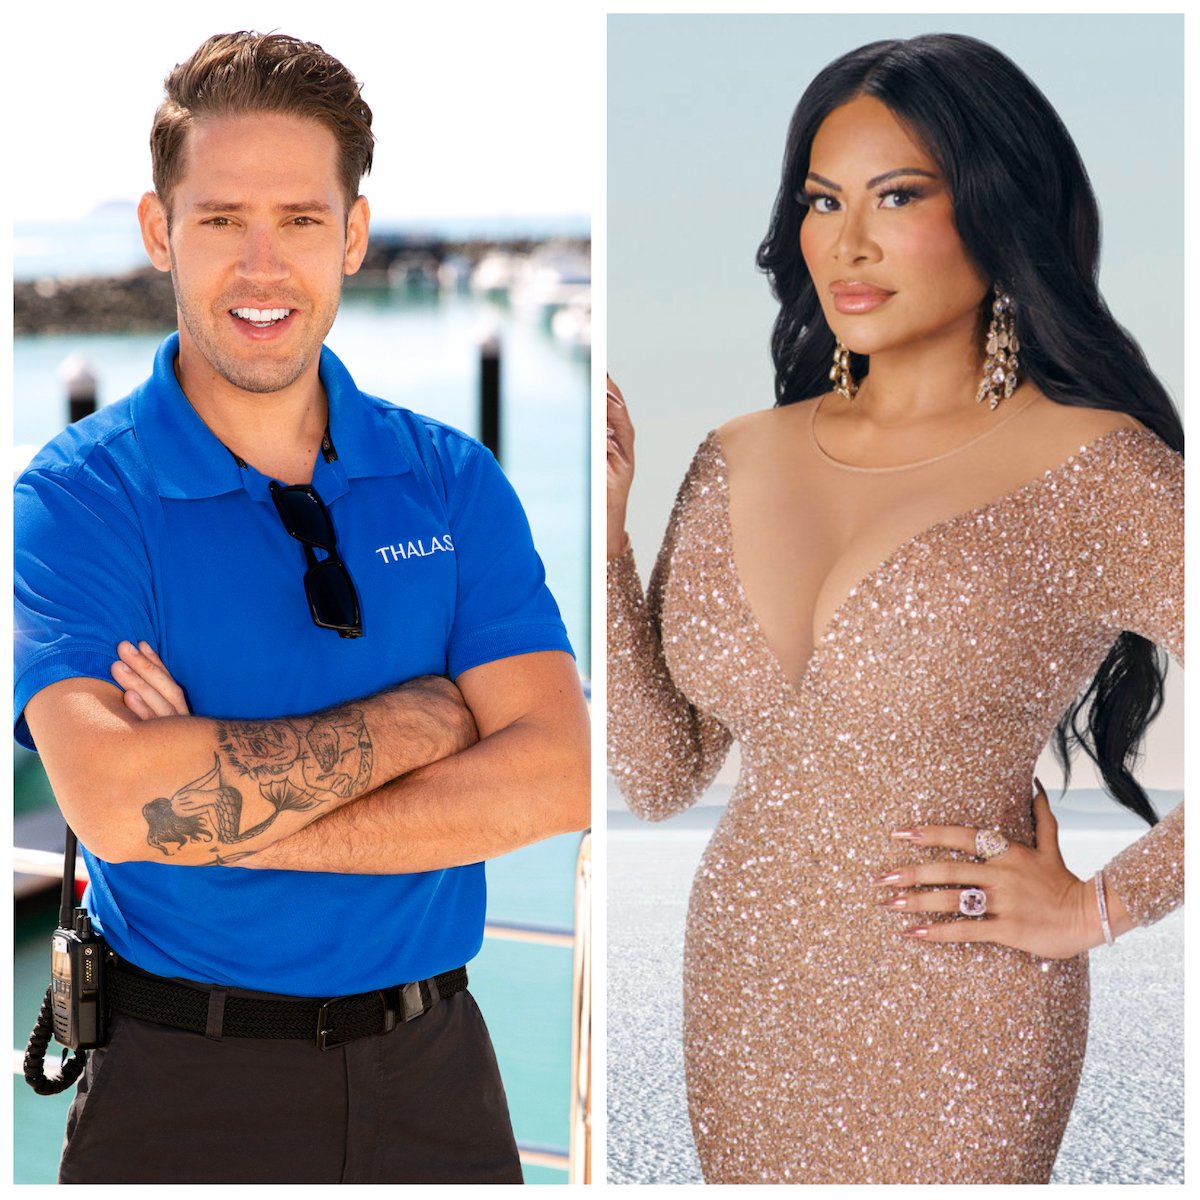 Chef Ryan McKeown from 'Below Deck Down Under' and Jen Shah from 'RHOSLC' cast photos